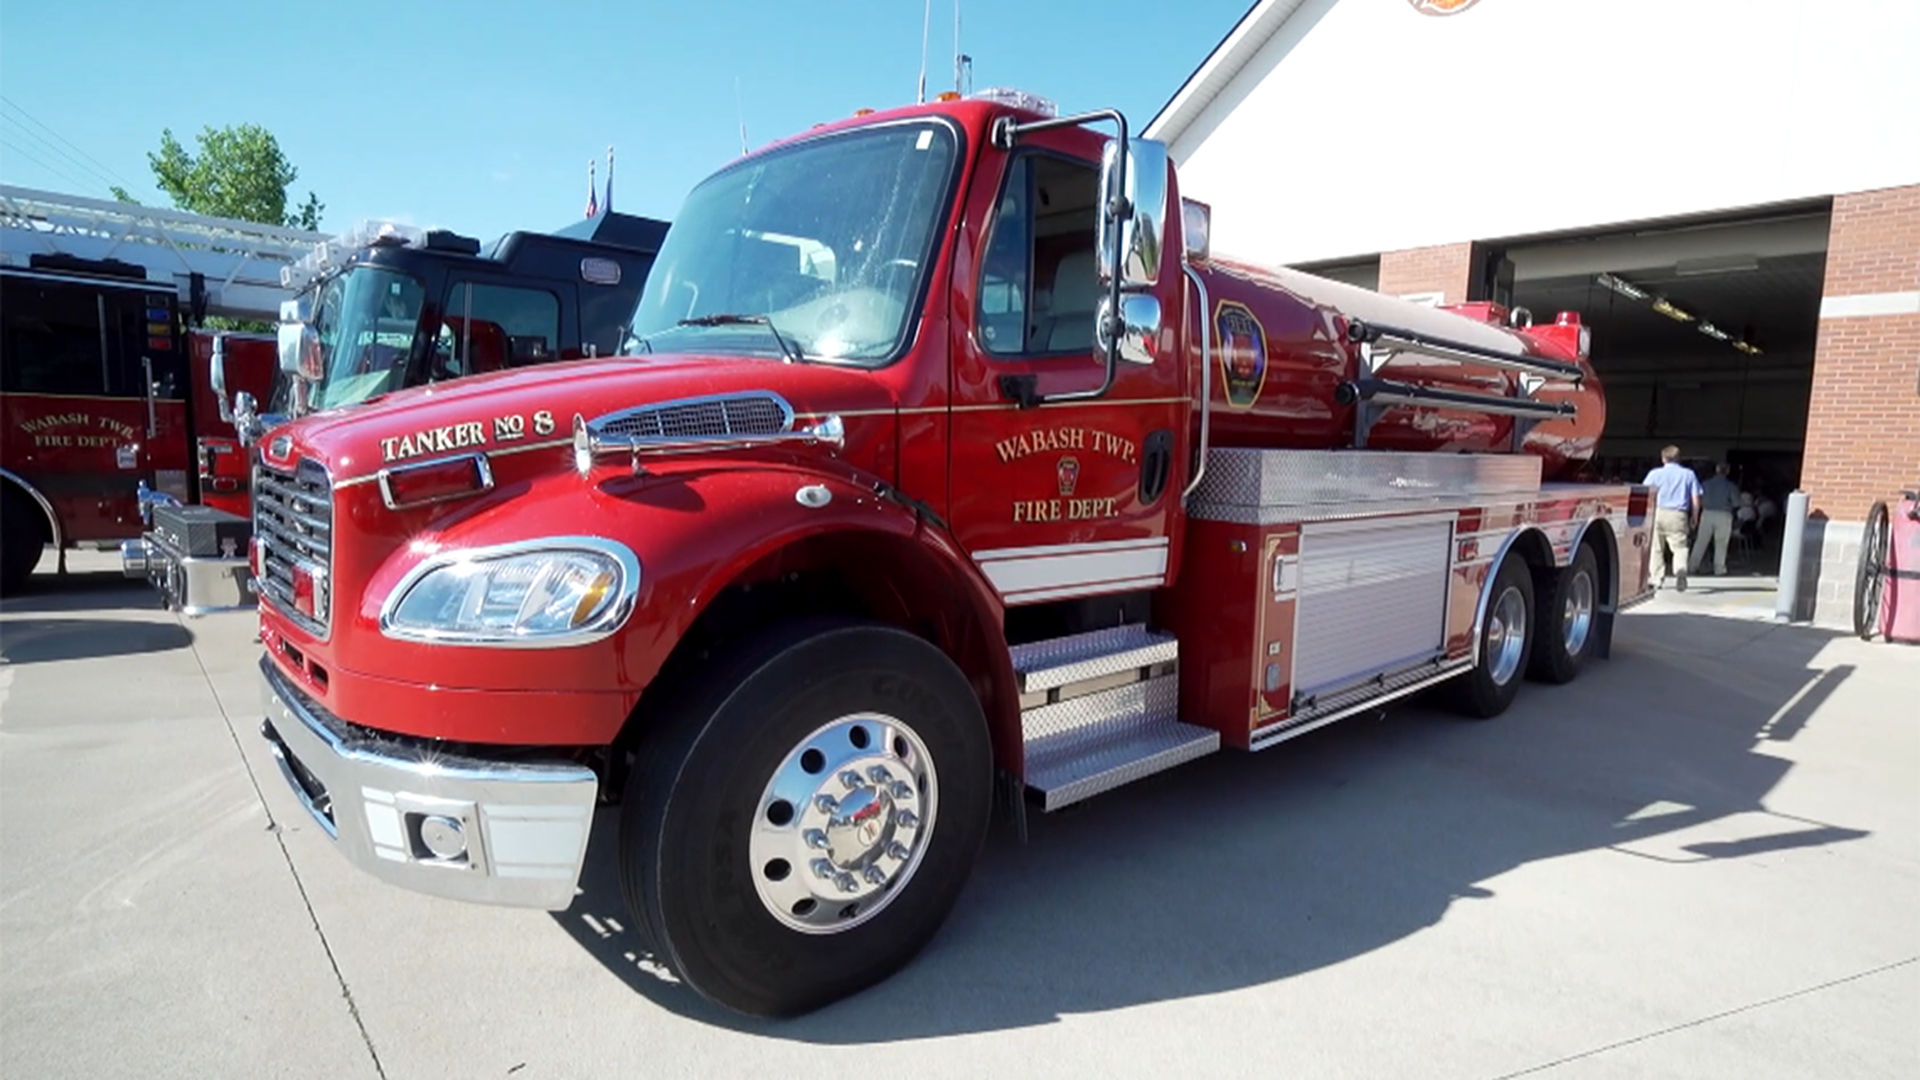 A local firefighters association is suing to try to stop a Wabash Township trustee from firing all of the township's paid firefighters.